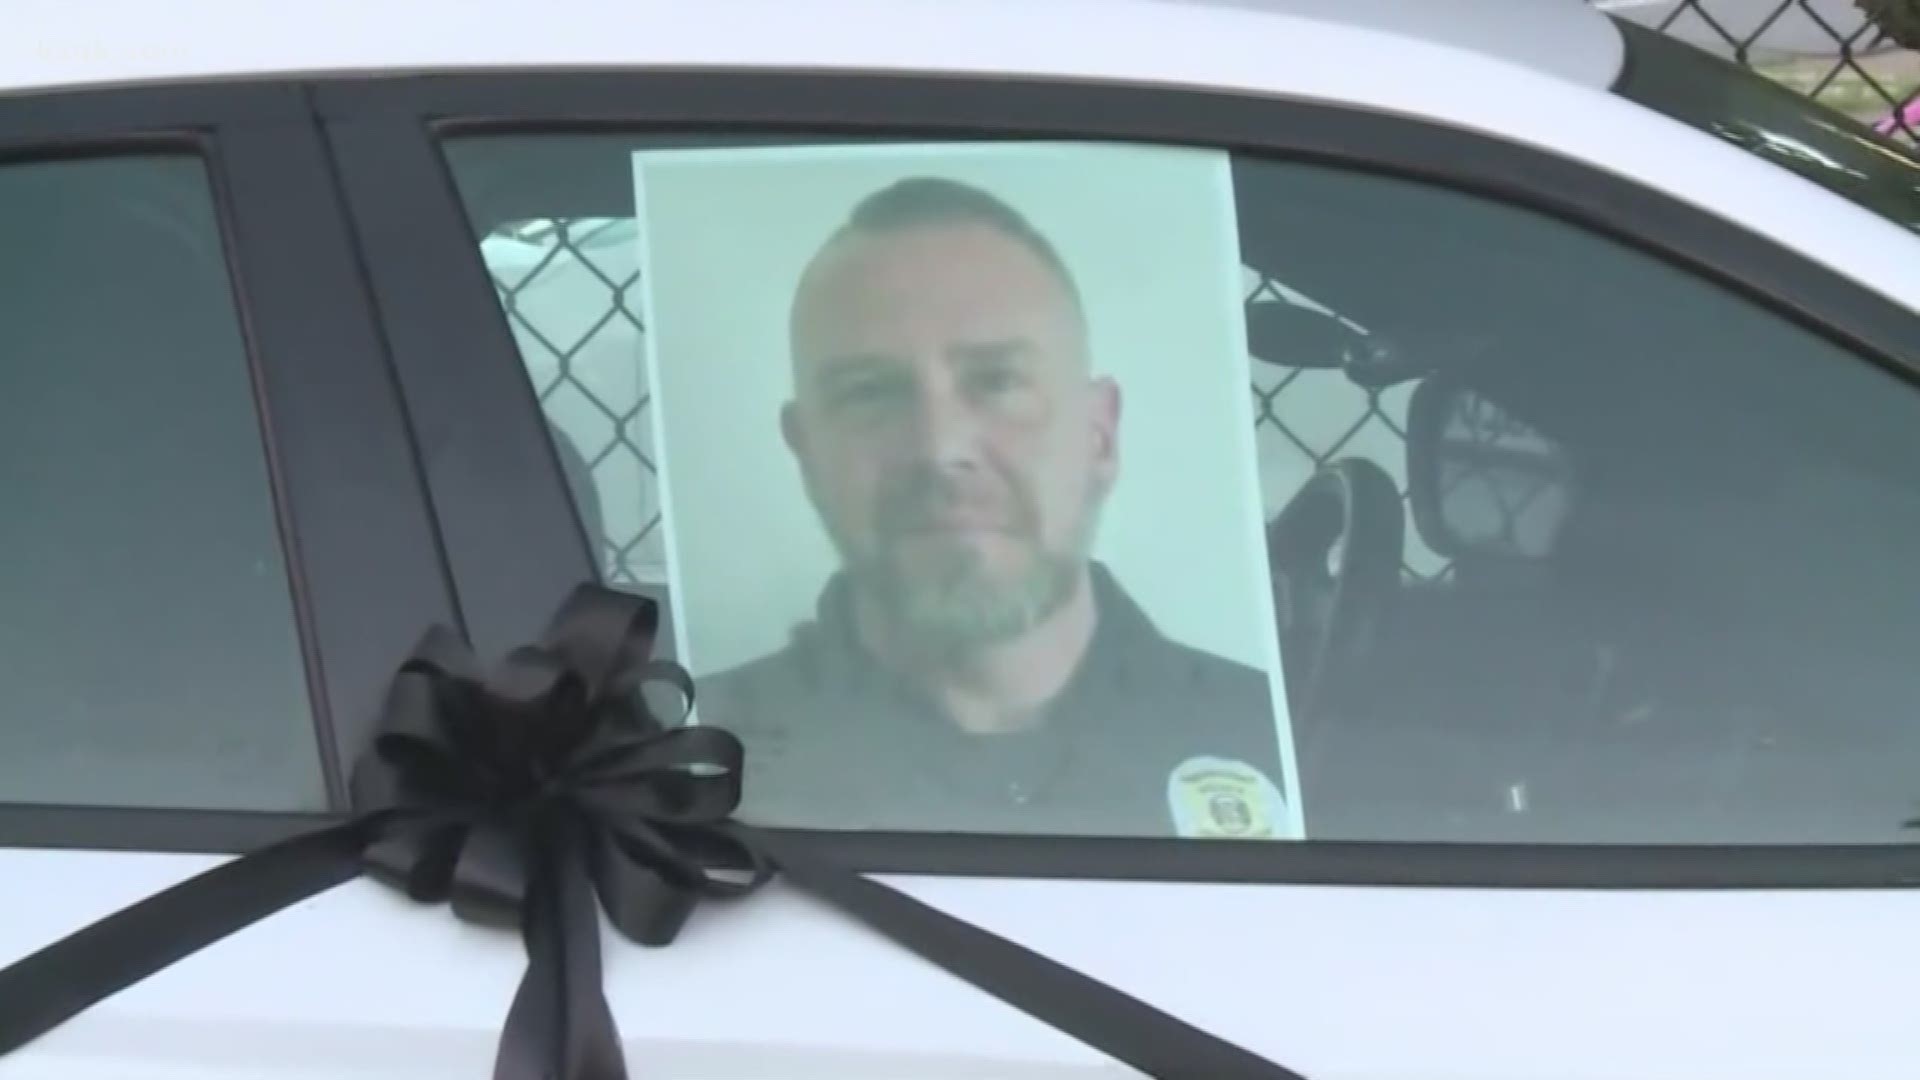 Tributes, respects and prayers continue pouring in for Officer Michael Langsdorf, the North County Cooperative police officer killed at a Wellston grocery store Sunday afternoon.